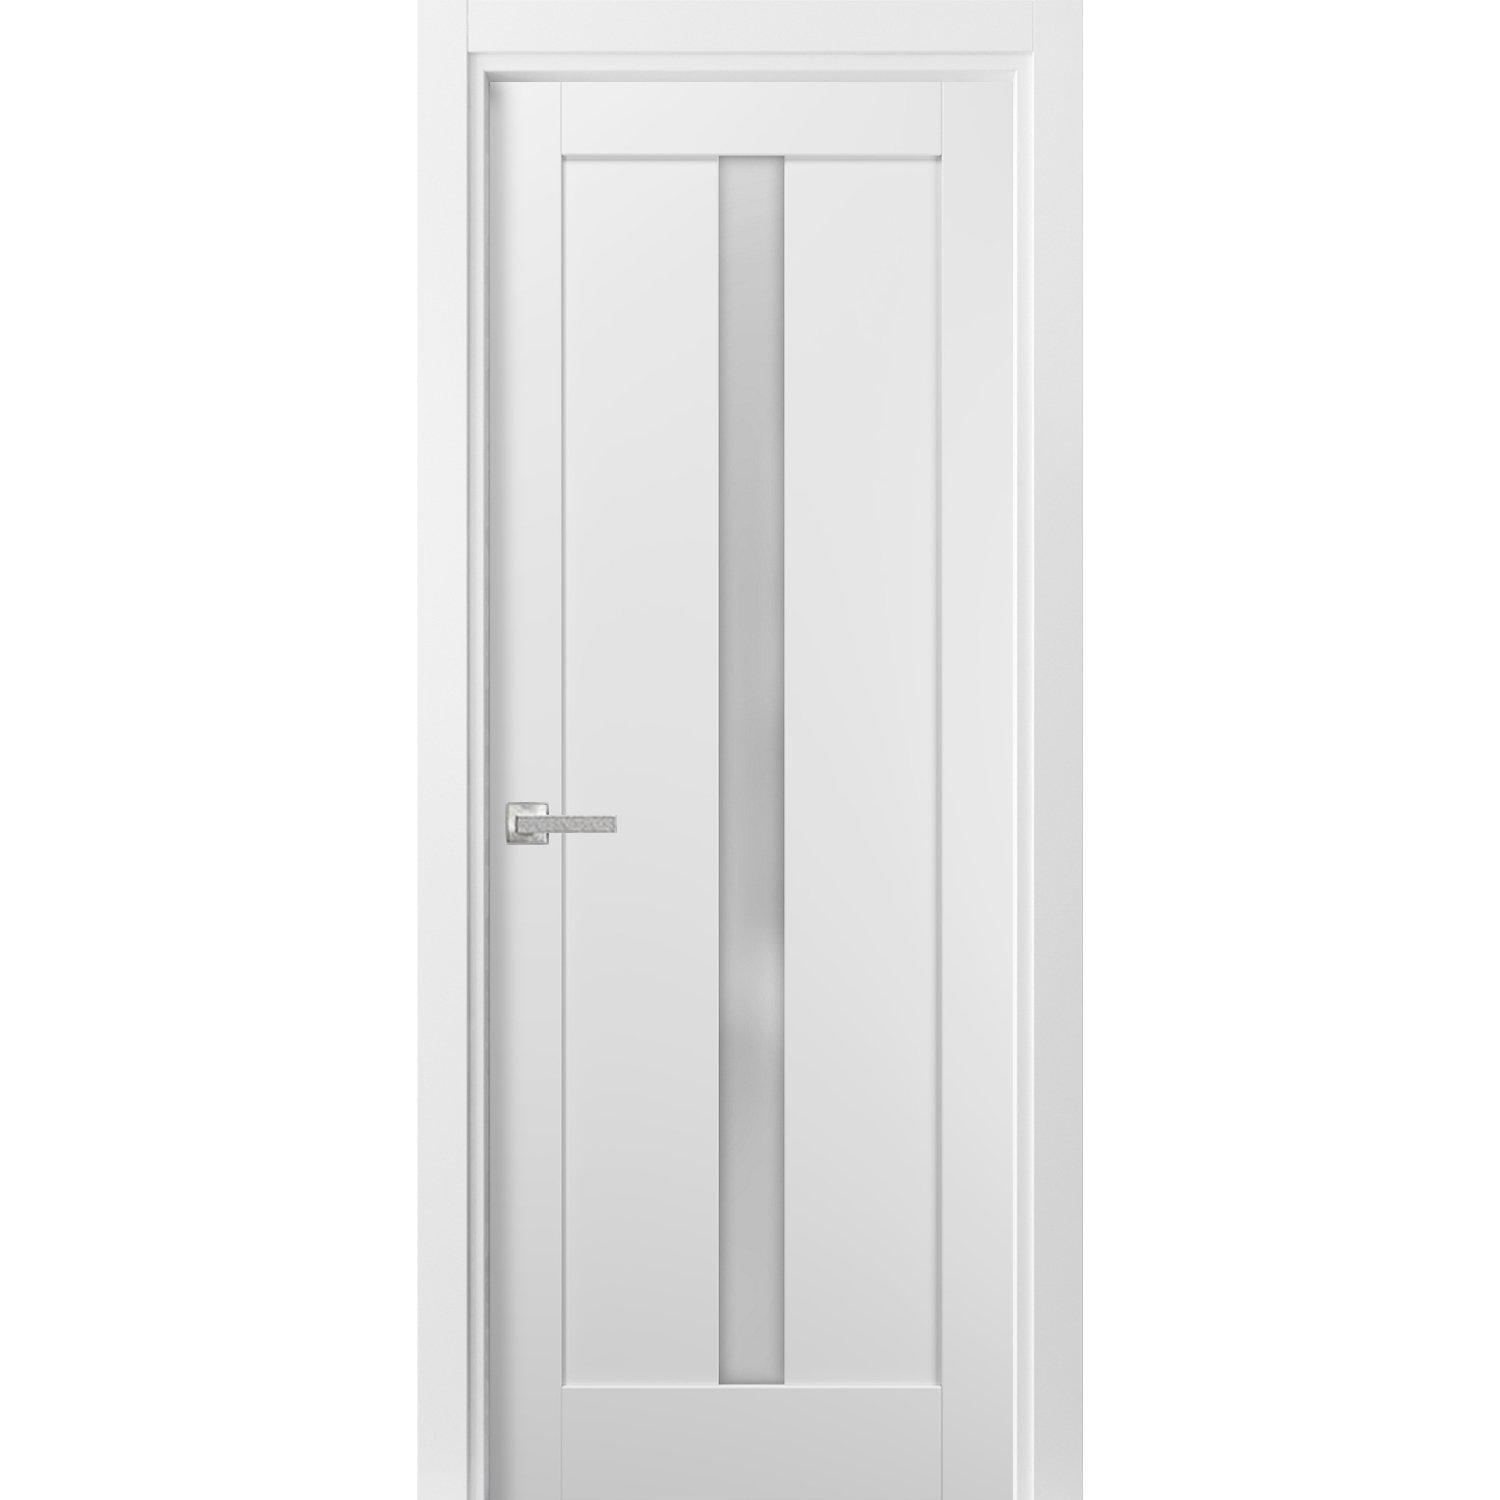 Pantry Kitchen Lite Door with Hardware | Quadro 4112 White Silk with Frosted Opaque Glass | Single Panel Frame Trims | Bathroom Bedroom Sturdy Doors 